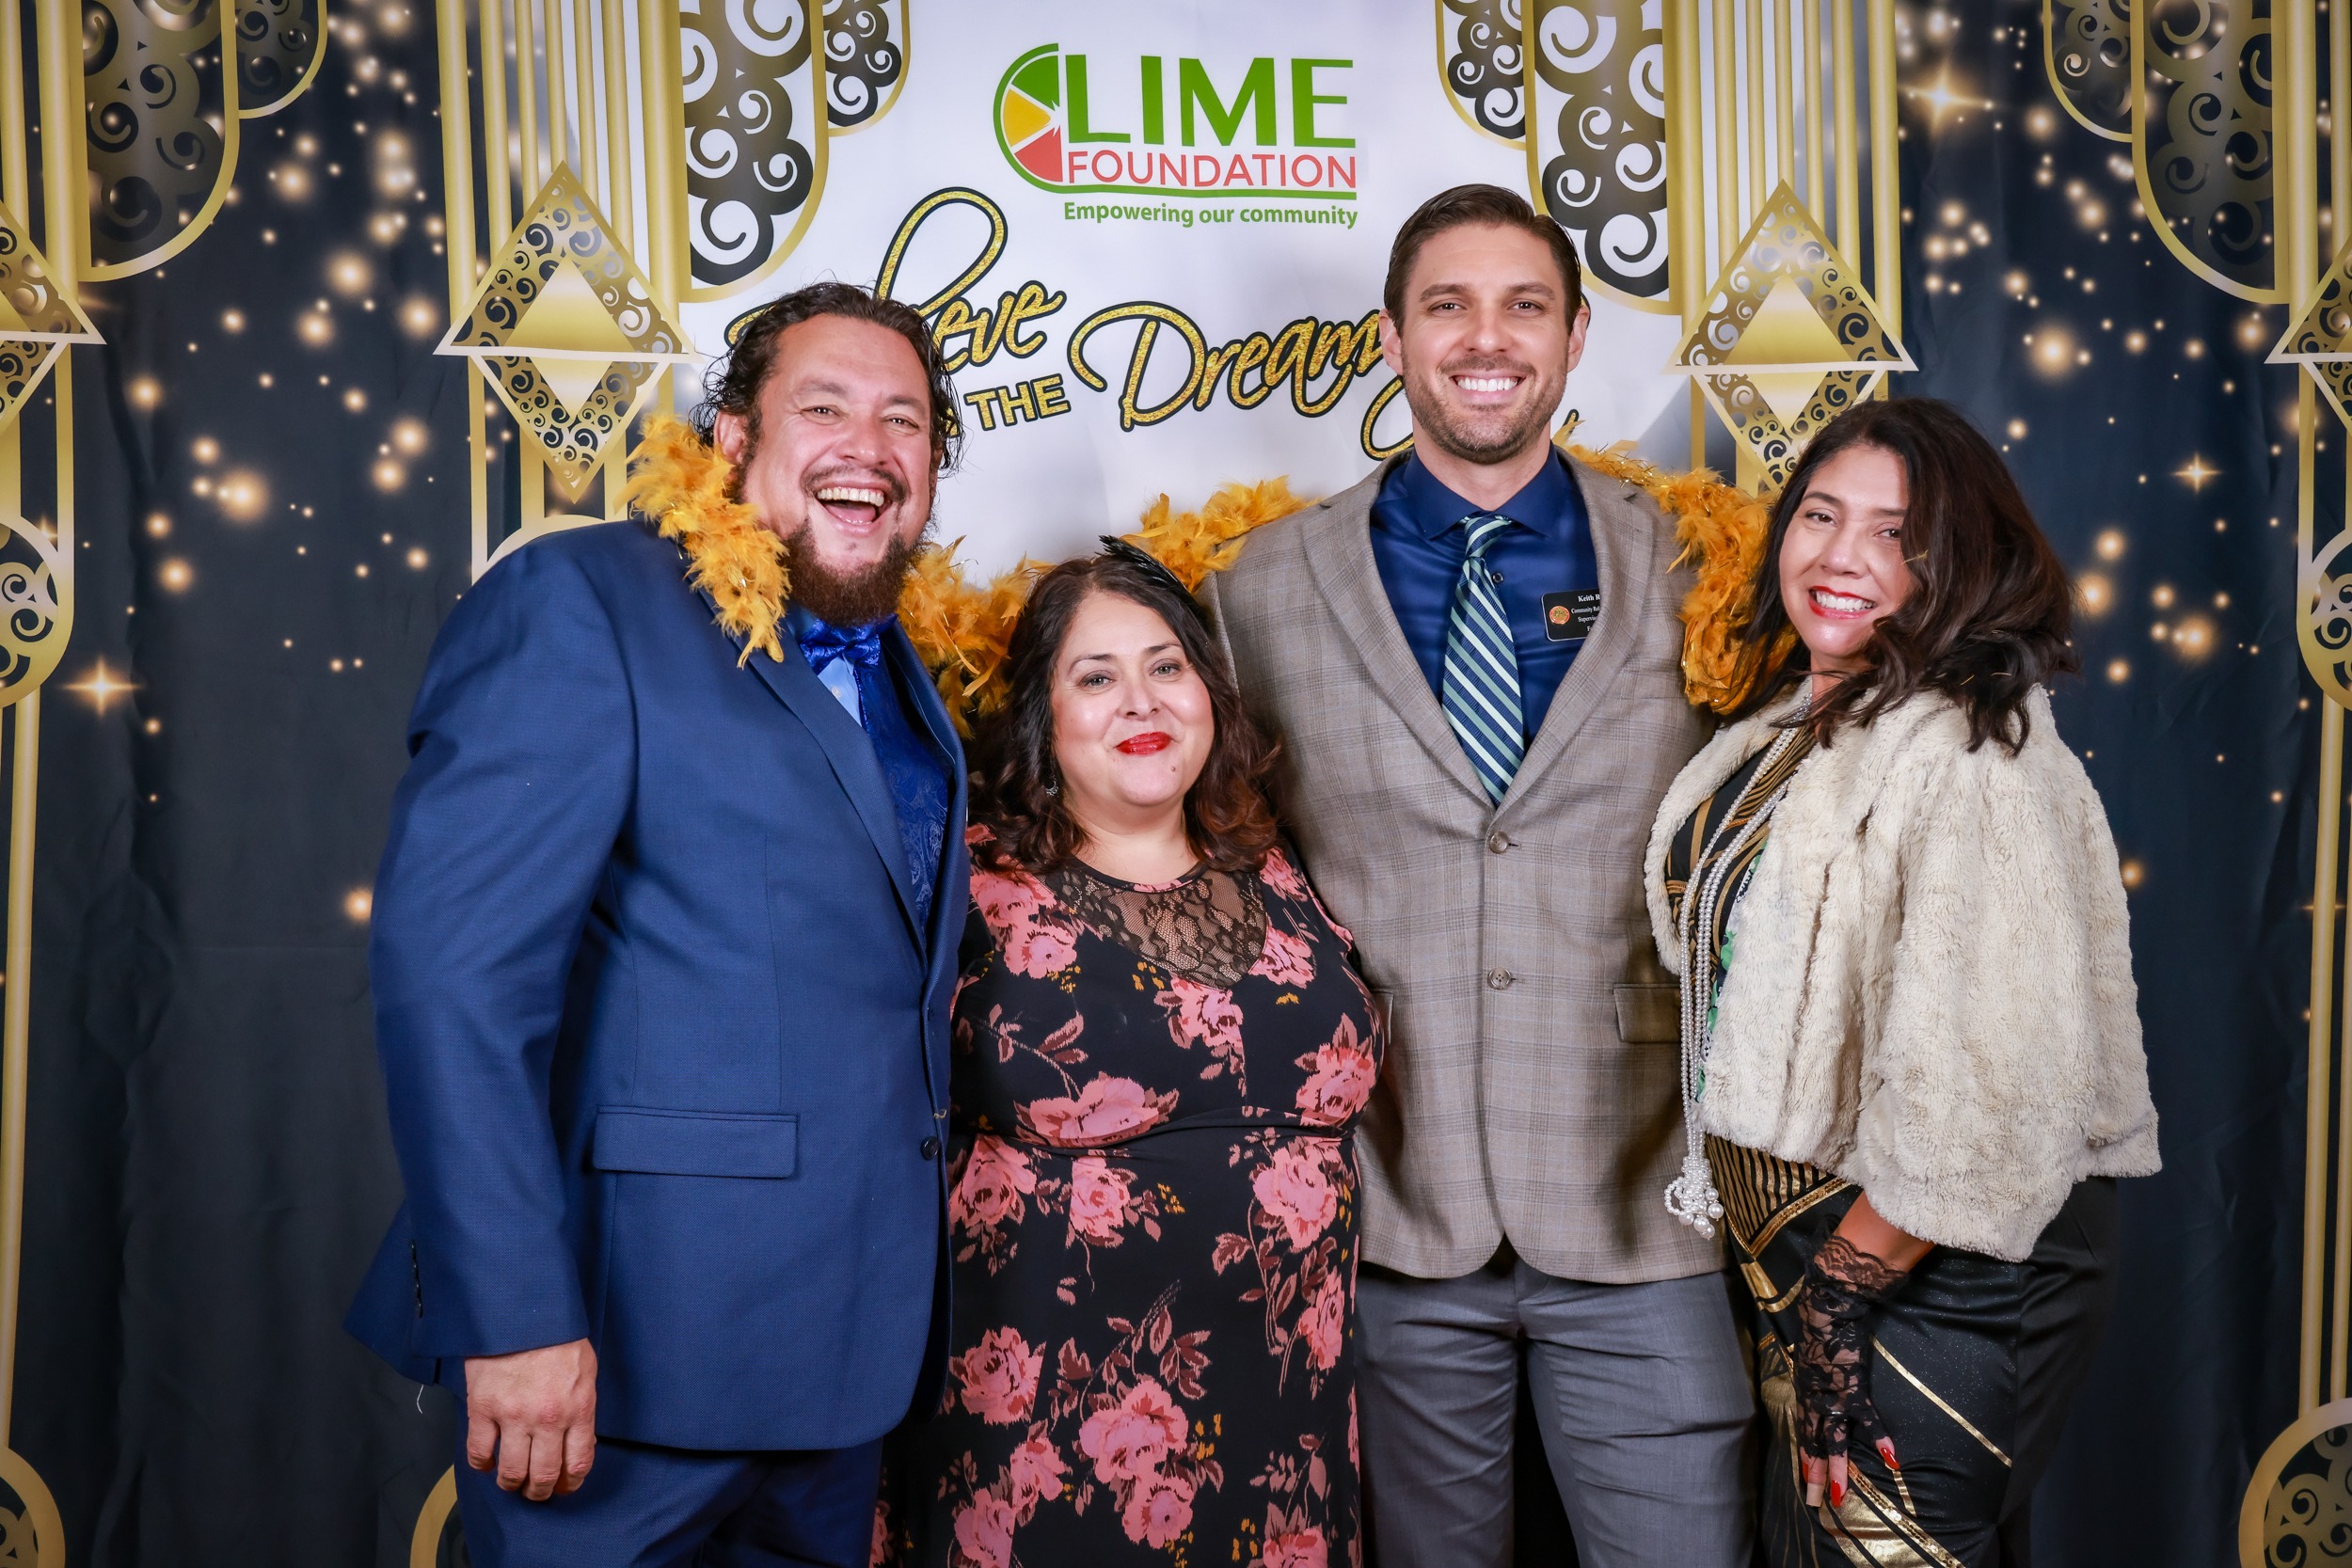 A group of people posing for a photo at a party hosted by The LIME Foundation of Santa Rosa.